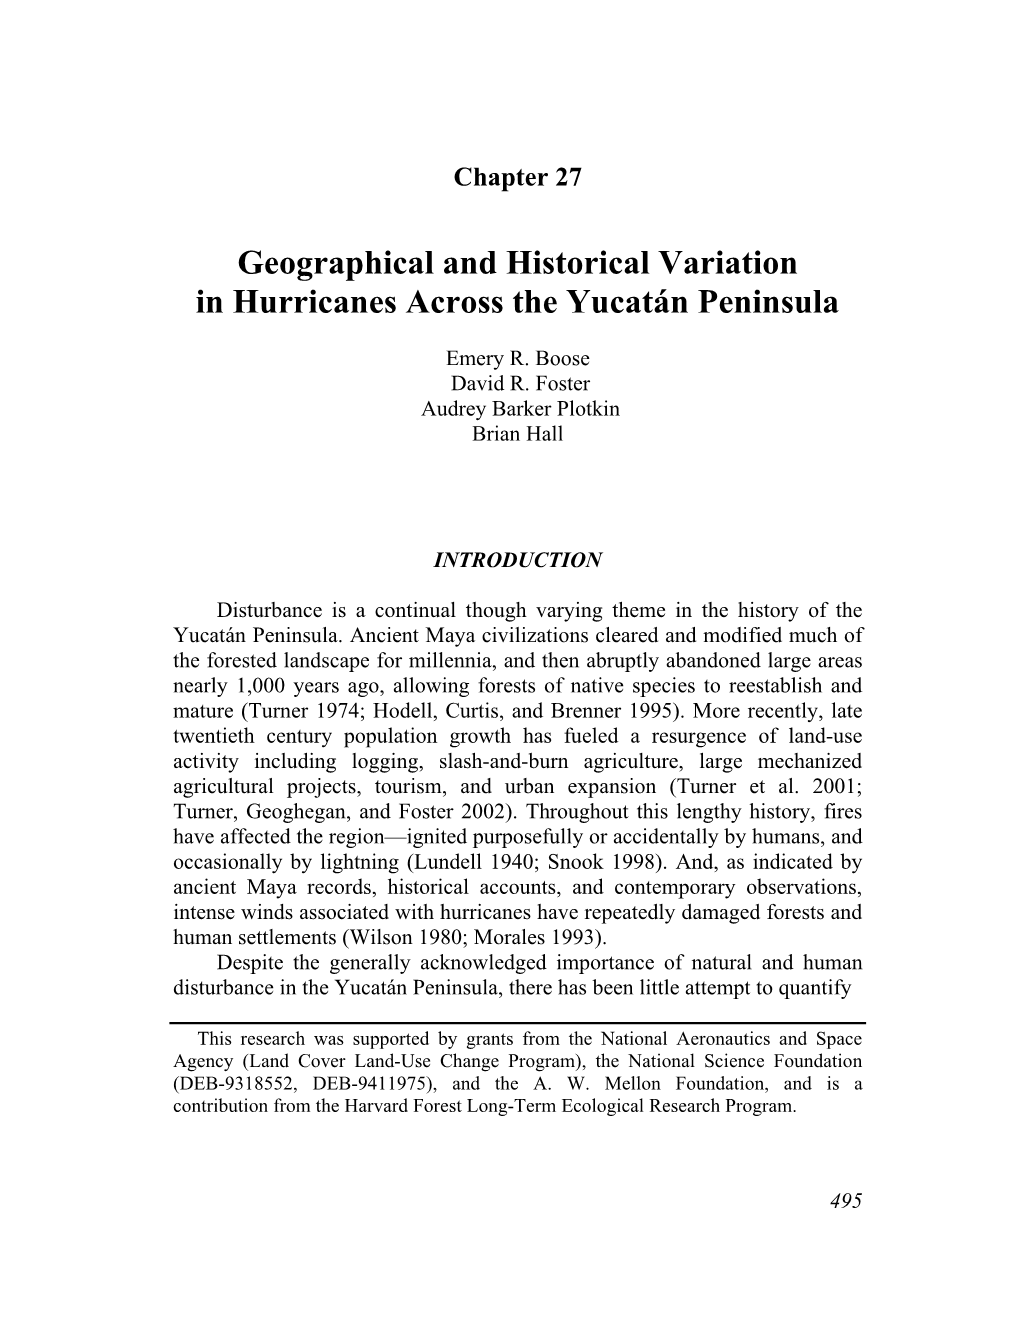 Geographical and Historical Variation in Hurricanes Across the Yucatán Peninsula